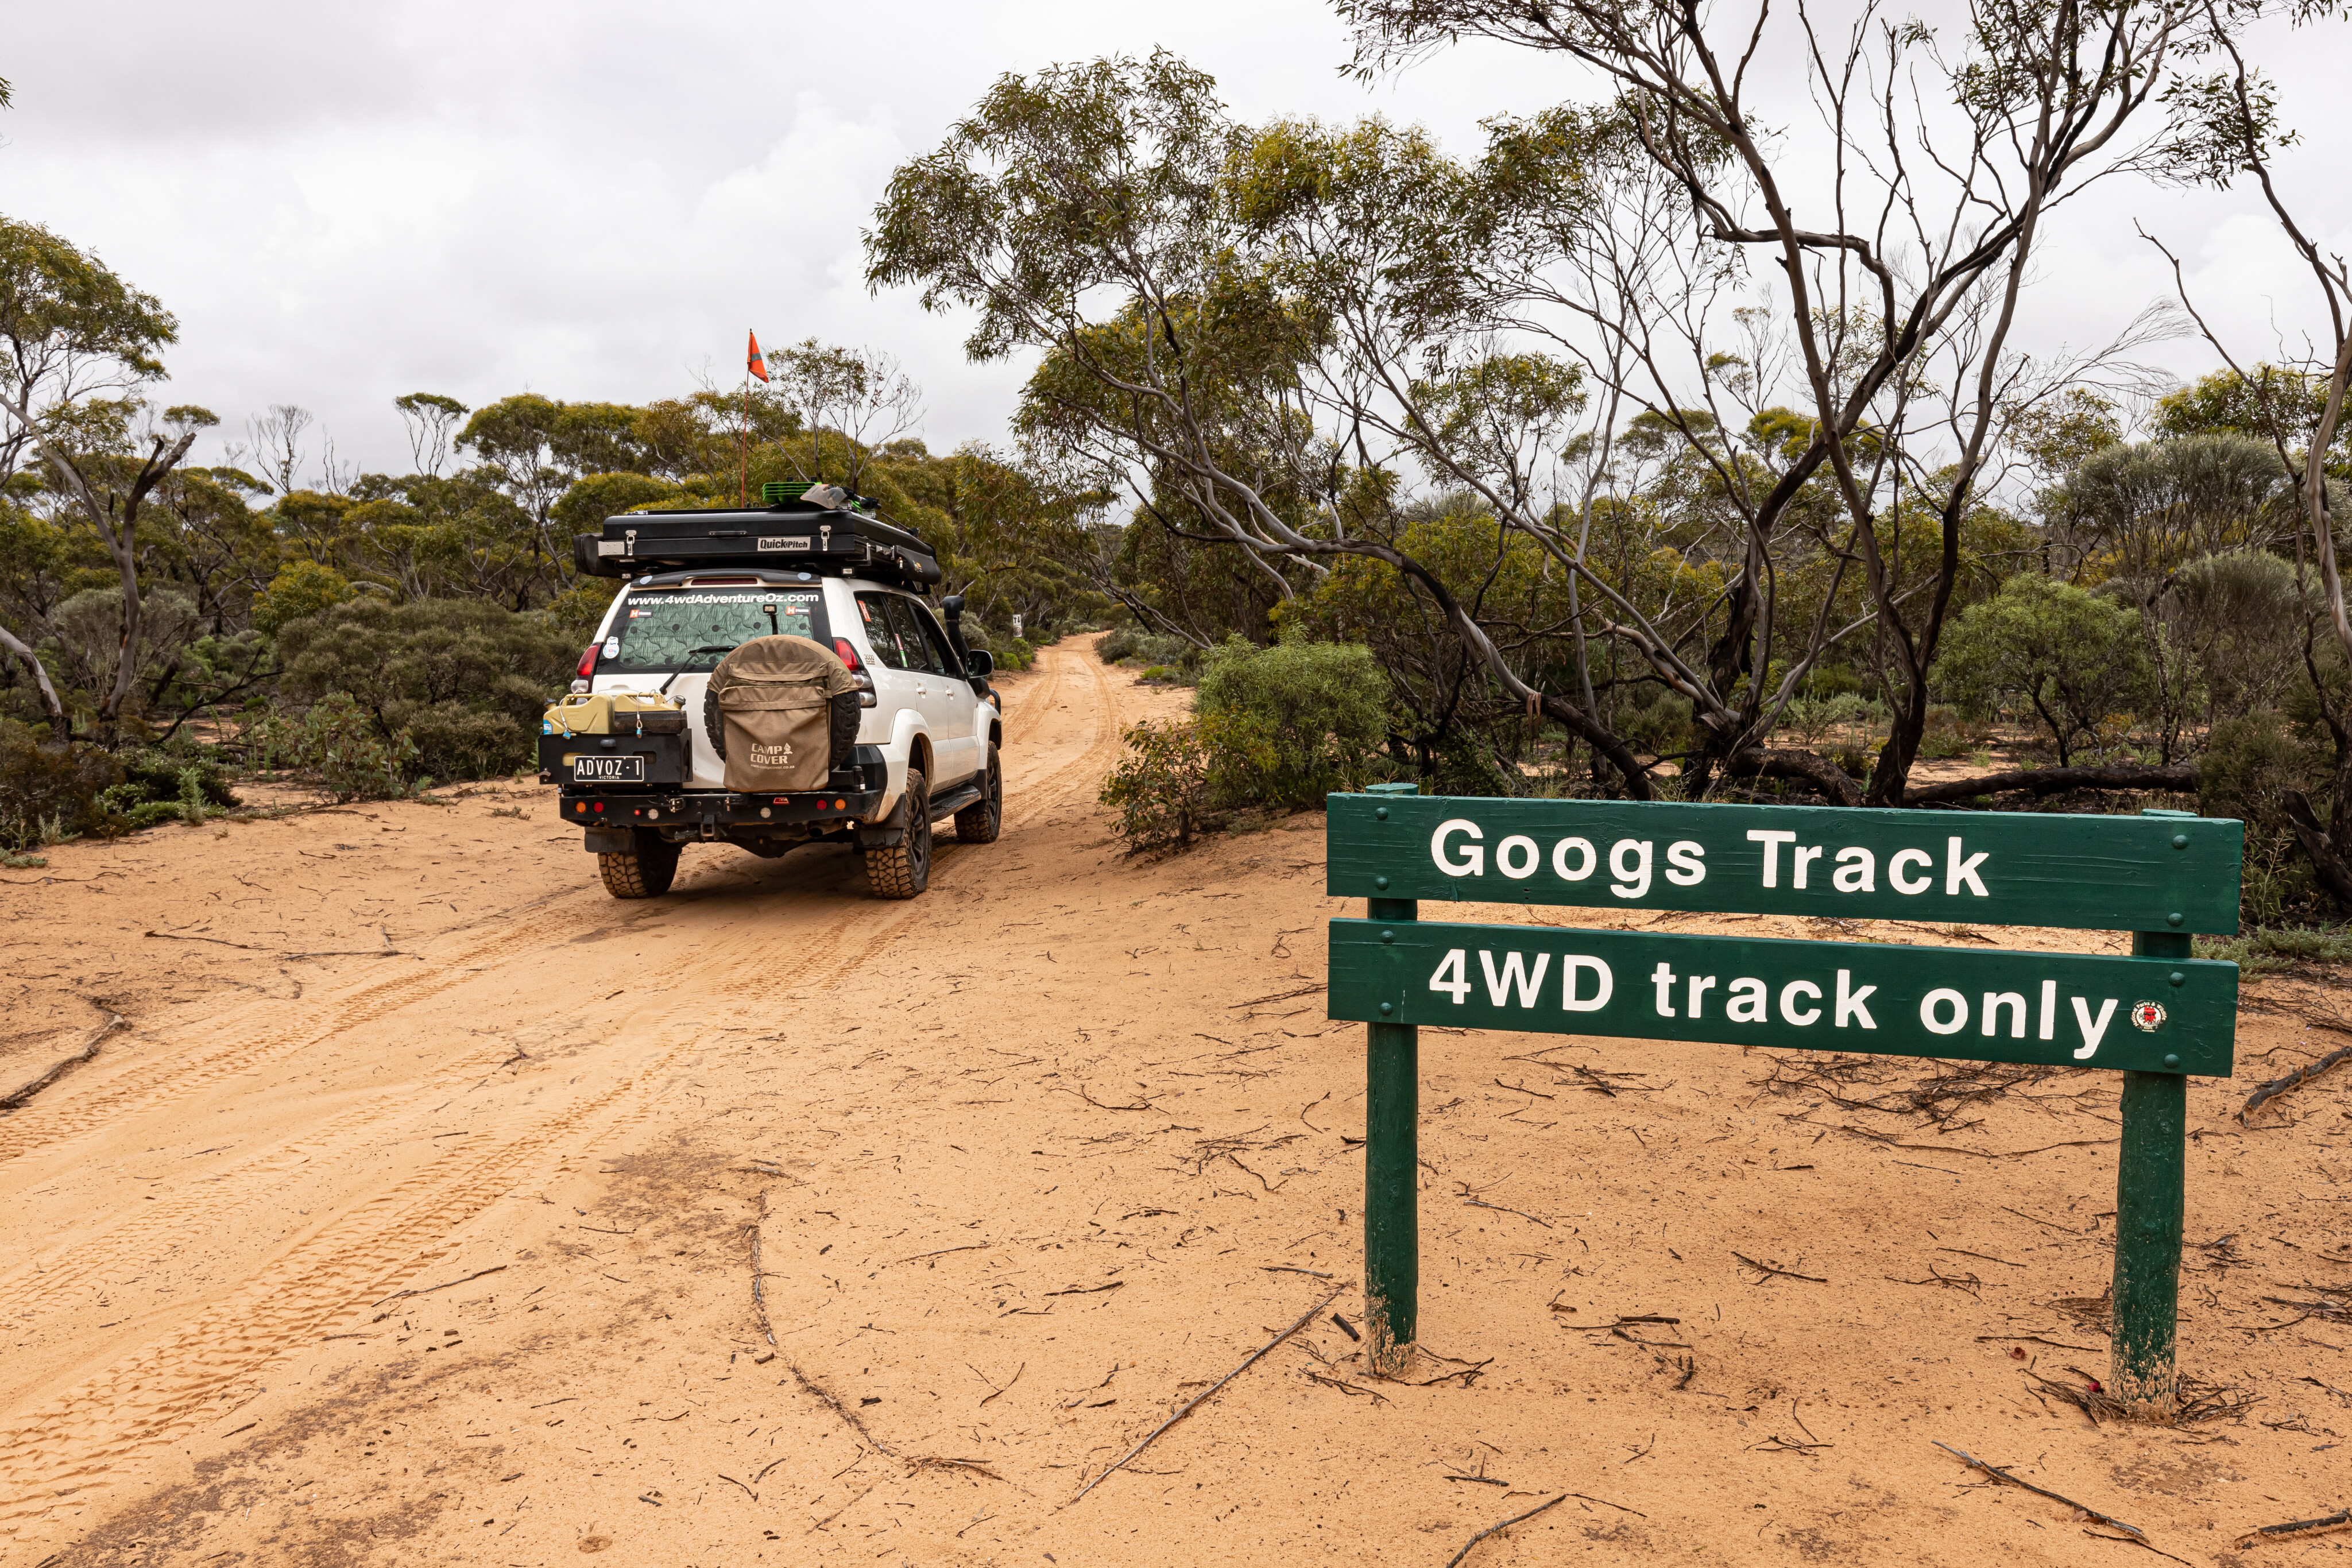 4d5c214c/4x4 australia googs track looking forward the upcoming challenges jpg